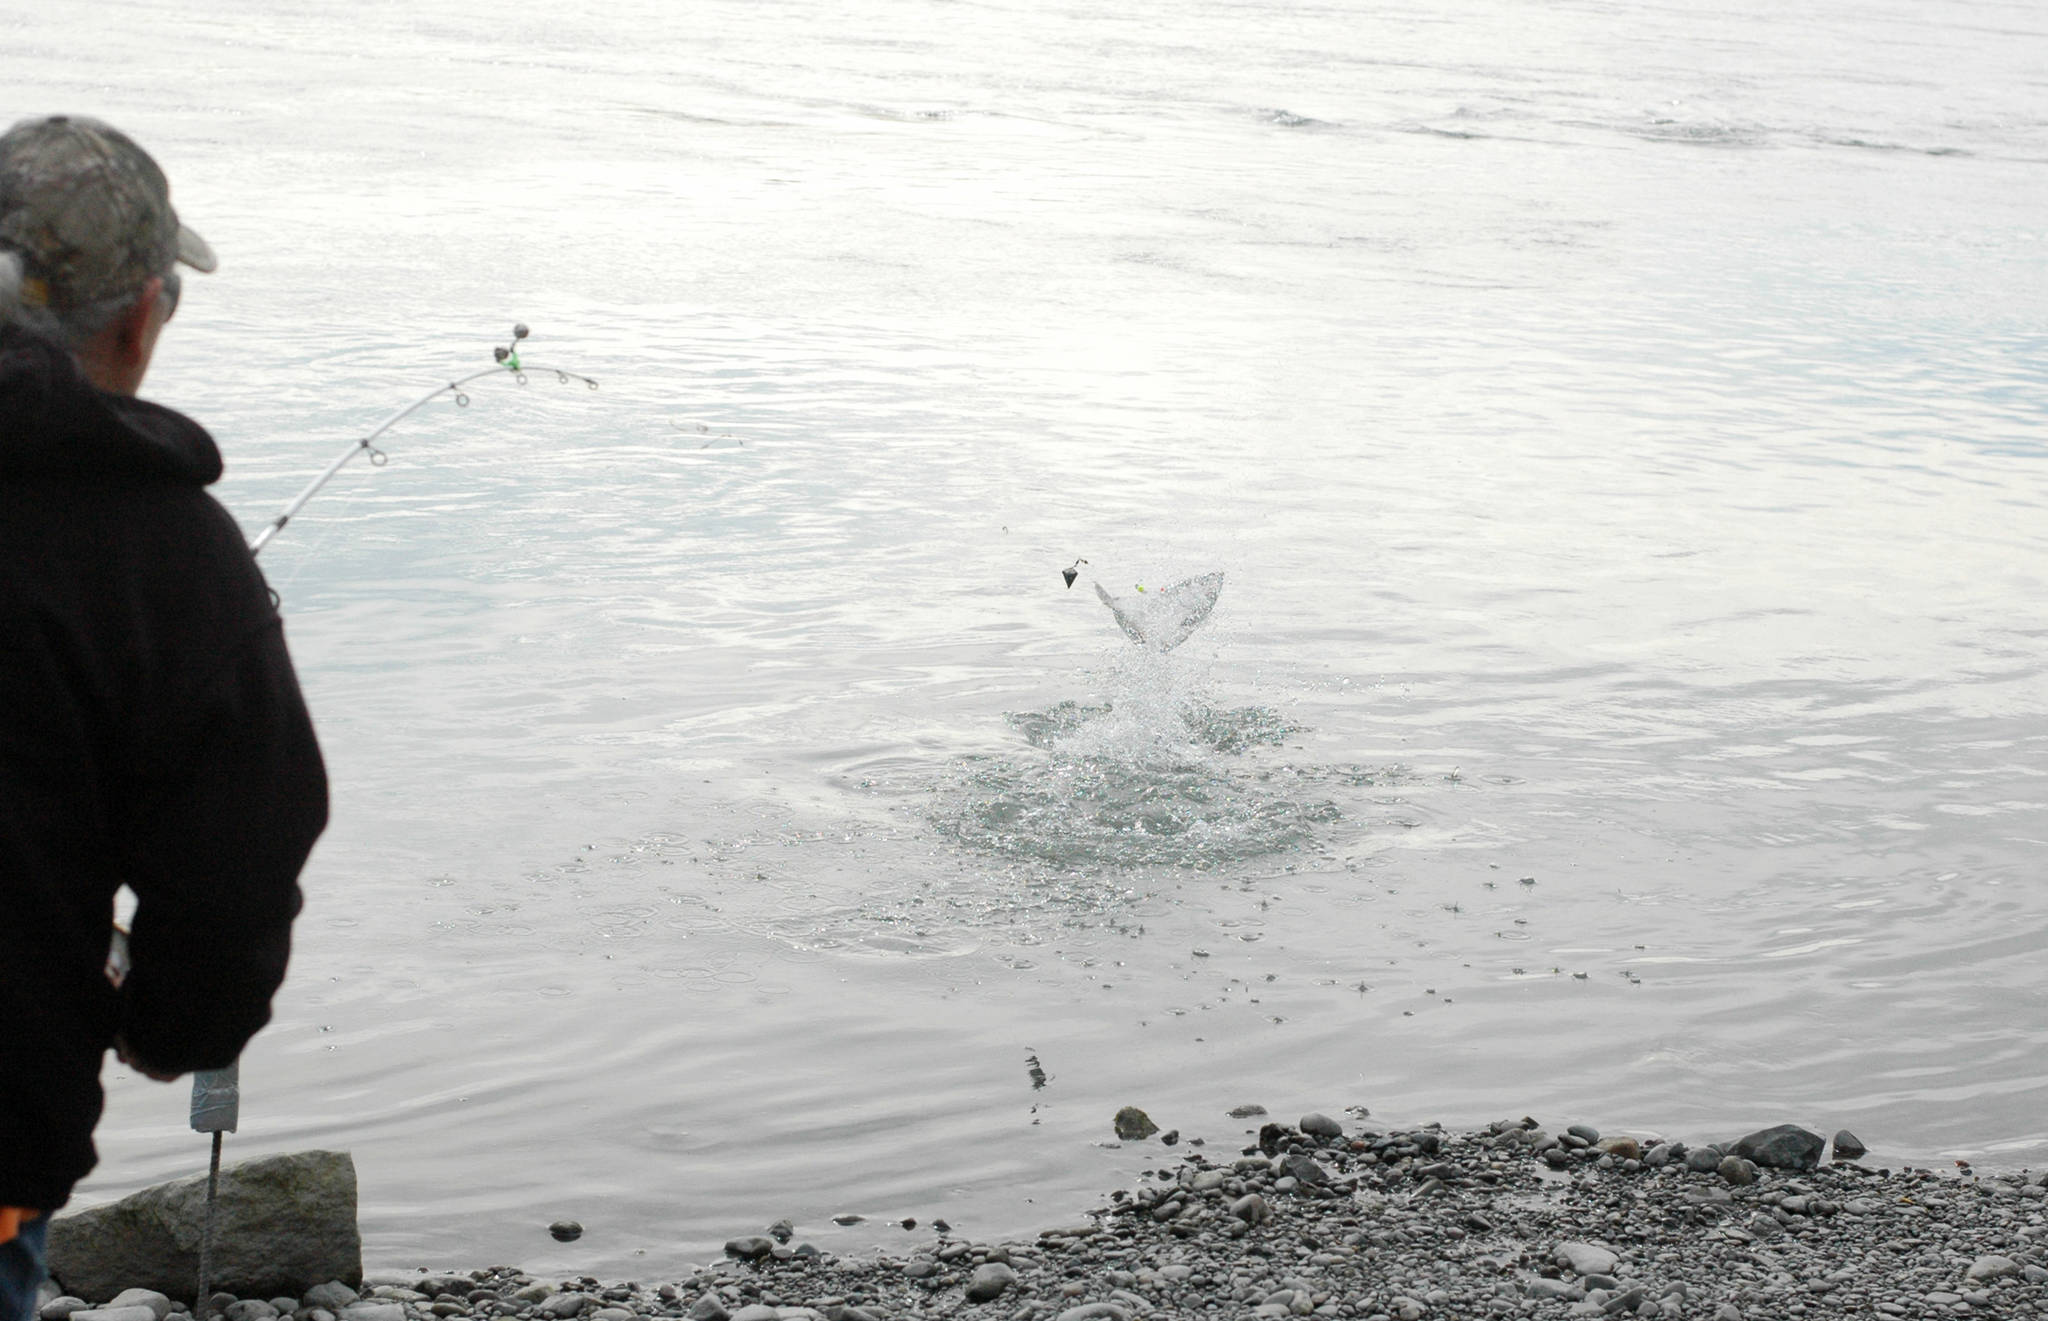 An angler wrestles with a silver salmon on her line in the Kenai River at Cunningham Park on Wednesday, Aug. 30, 2018 in Kenai, Alaska. (Photo by Elizabeth Earl/Peninsula Clarion)